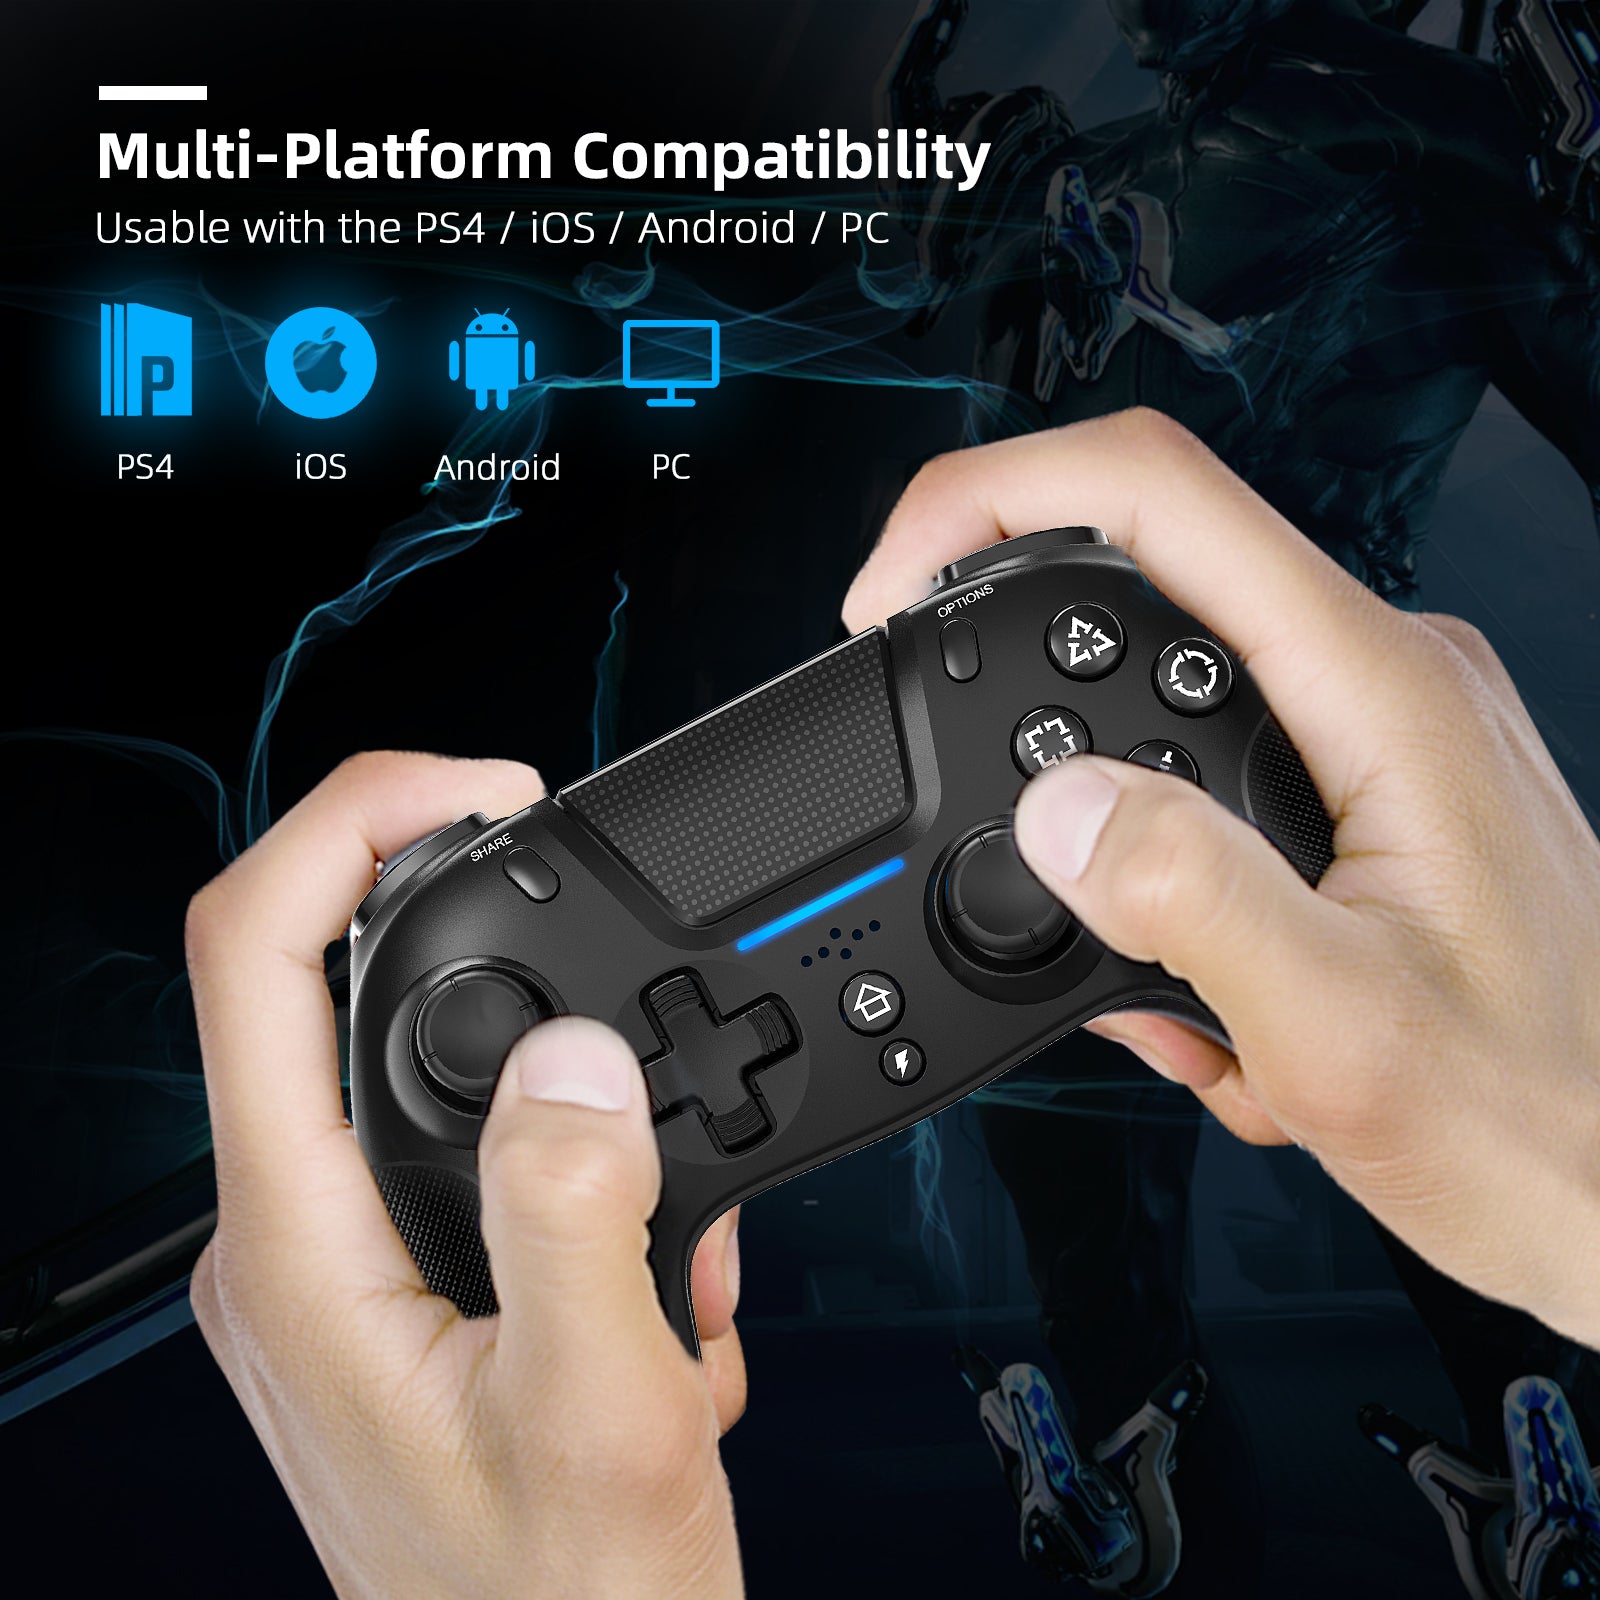 Controller compatible with PS4, iOS, Android, and PC